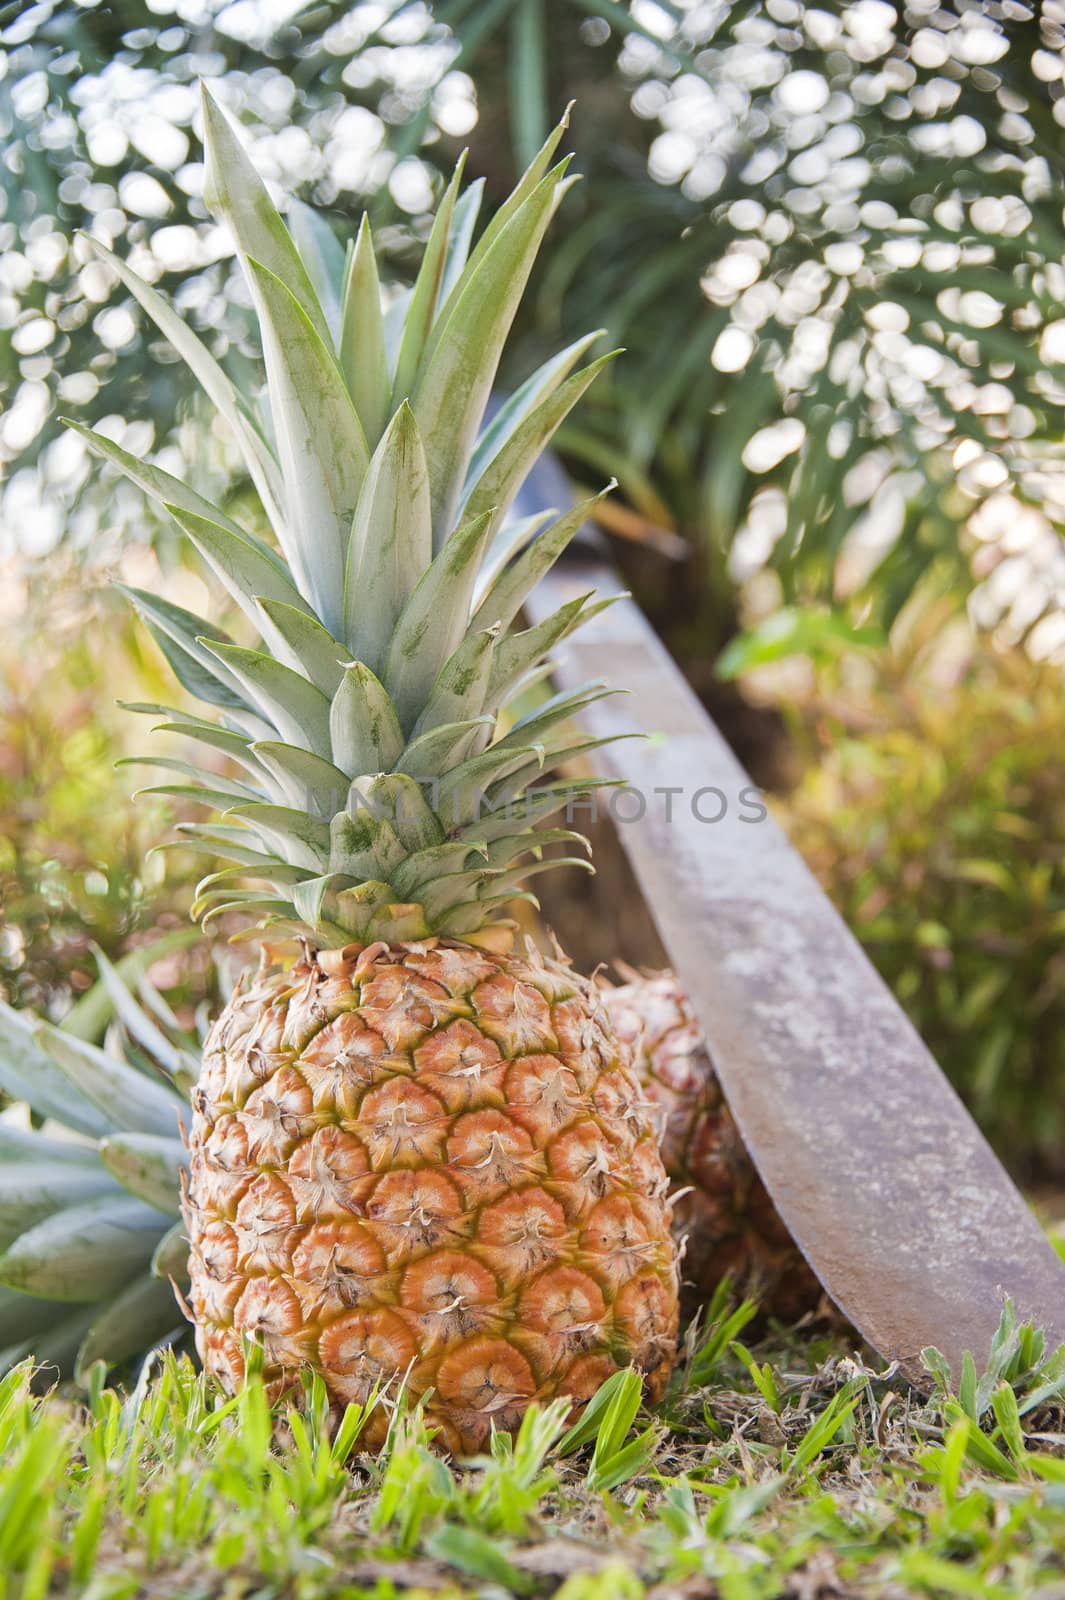 Harvested Pineapples by billberryphotography